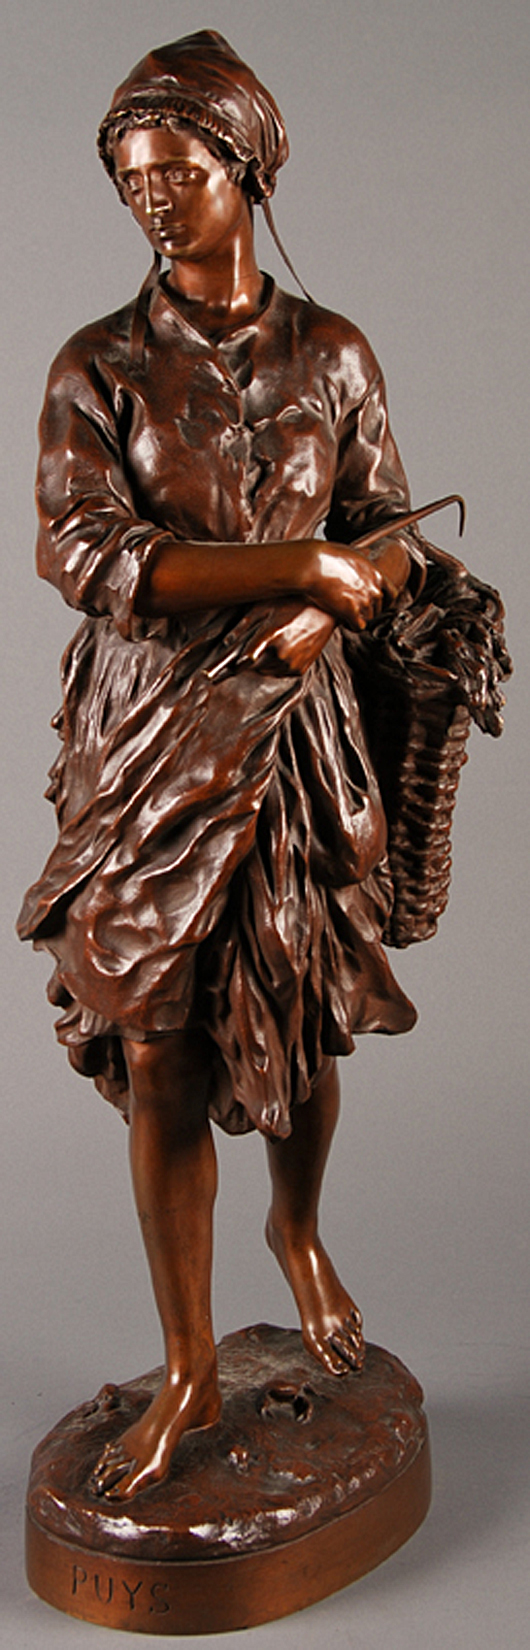 Jean Carpeaux (French, 1827-1975), La Pecheuse de Vignots (The Winkle Gatherer), signed bronze, 28 3/8 inches, stamped Propriete Carpeaux, inscribed Puys. Estimate $3,000-$5,000. Myers Auction Gallery image.